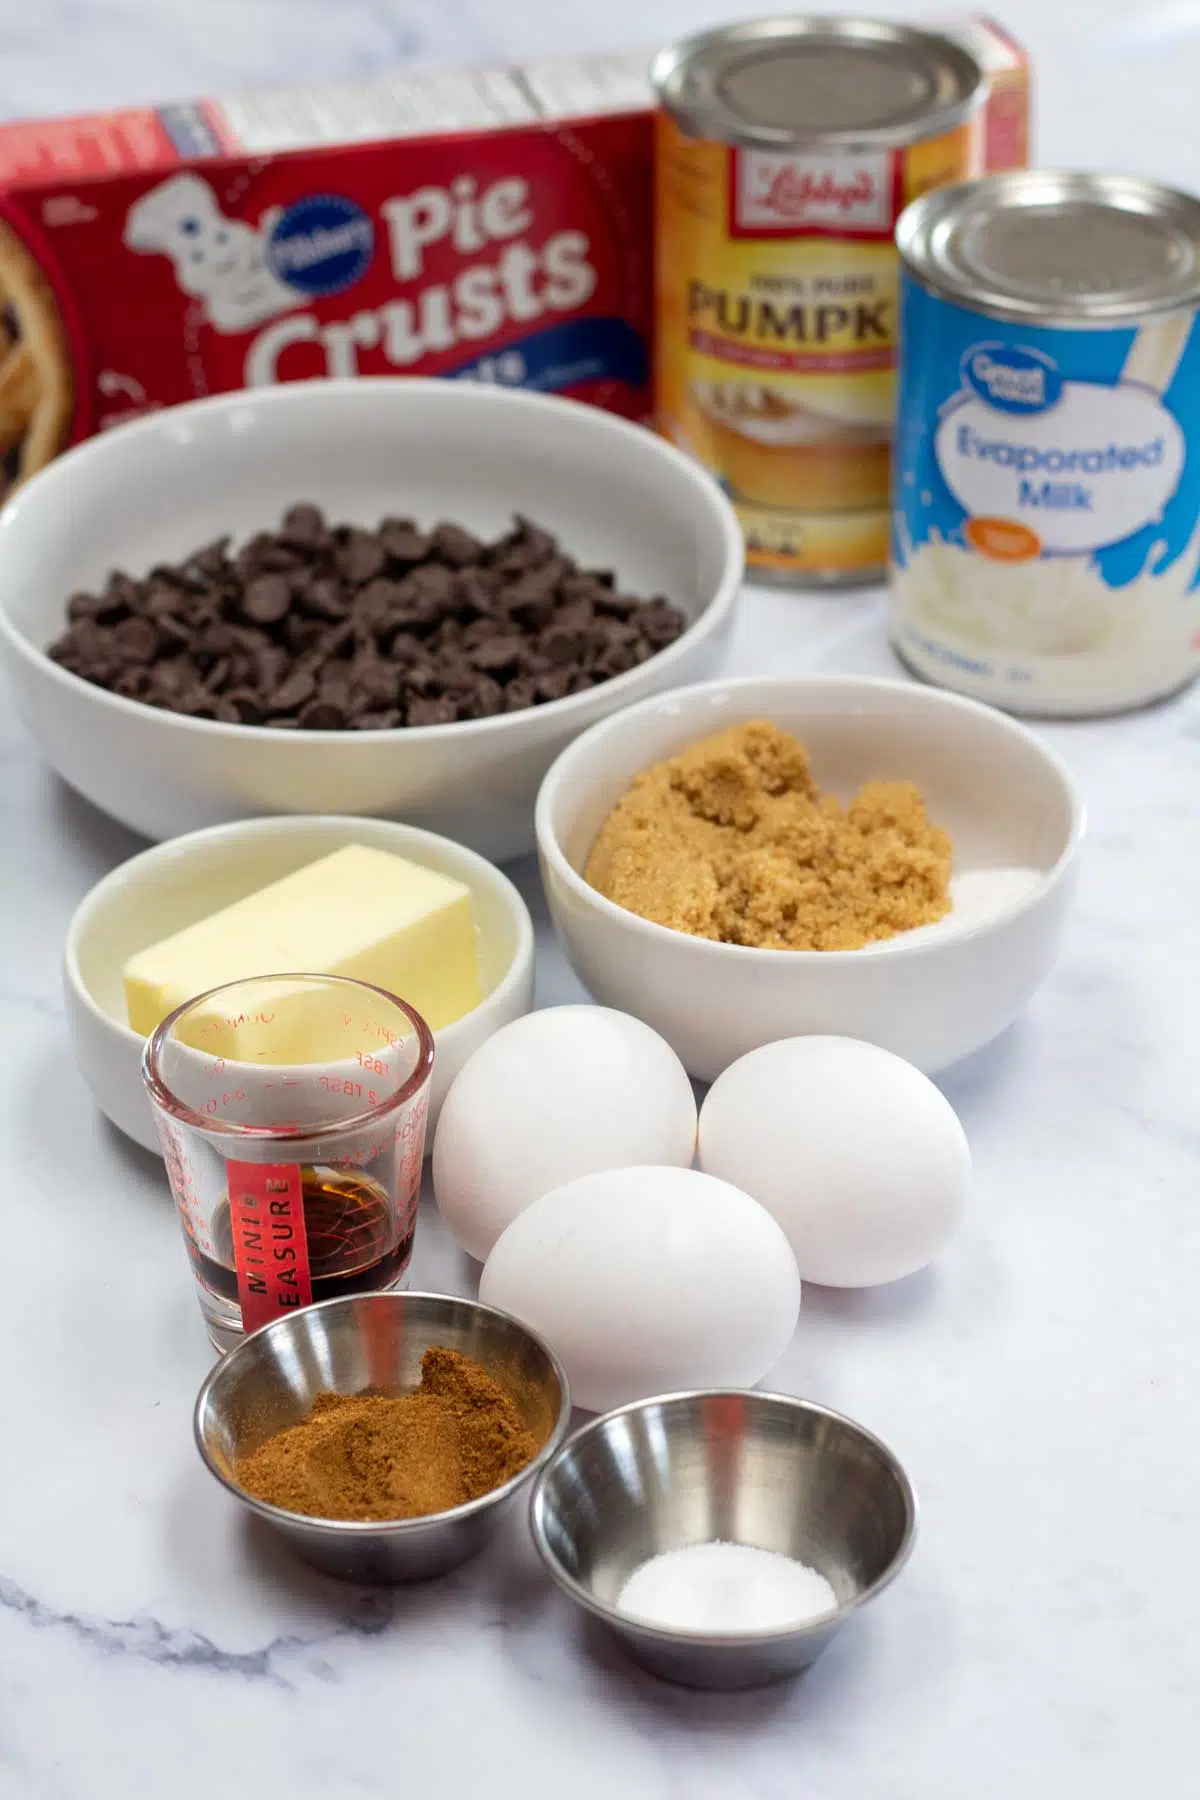 Tall image showing ingredients for chocolate pumpkin pie.